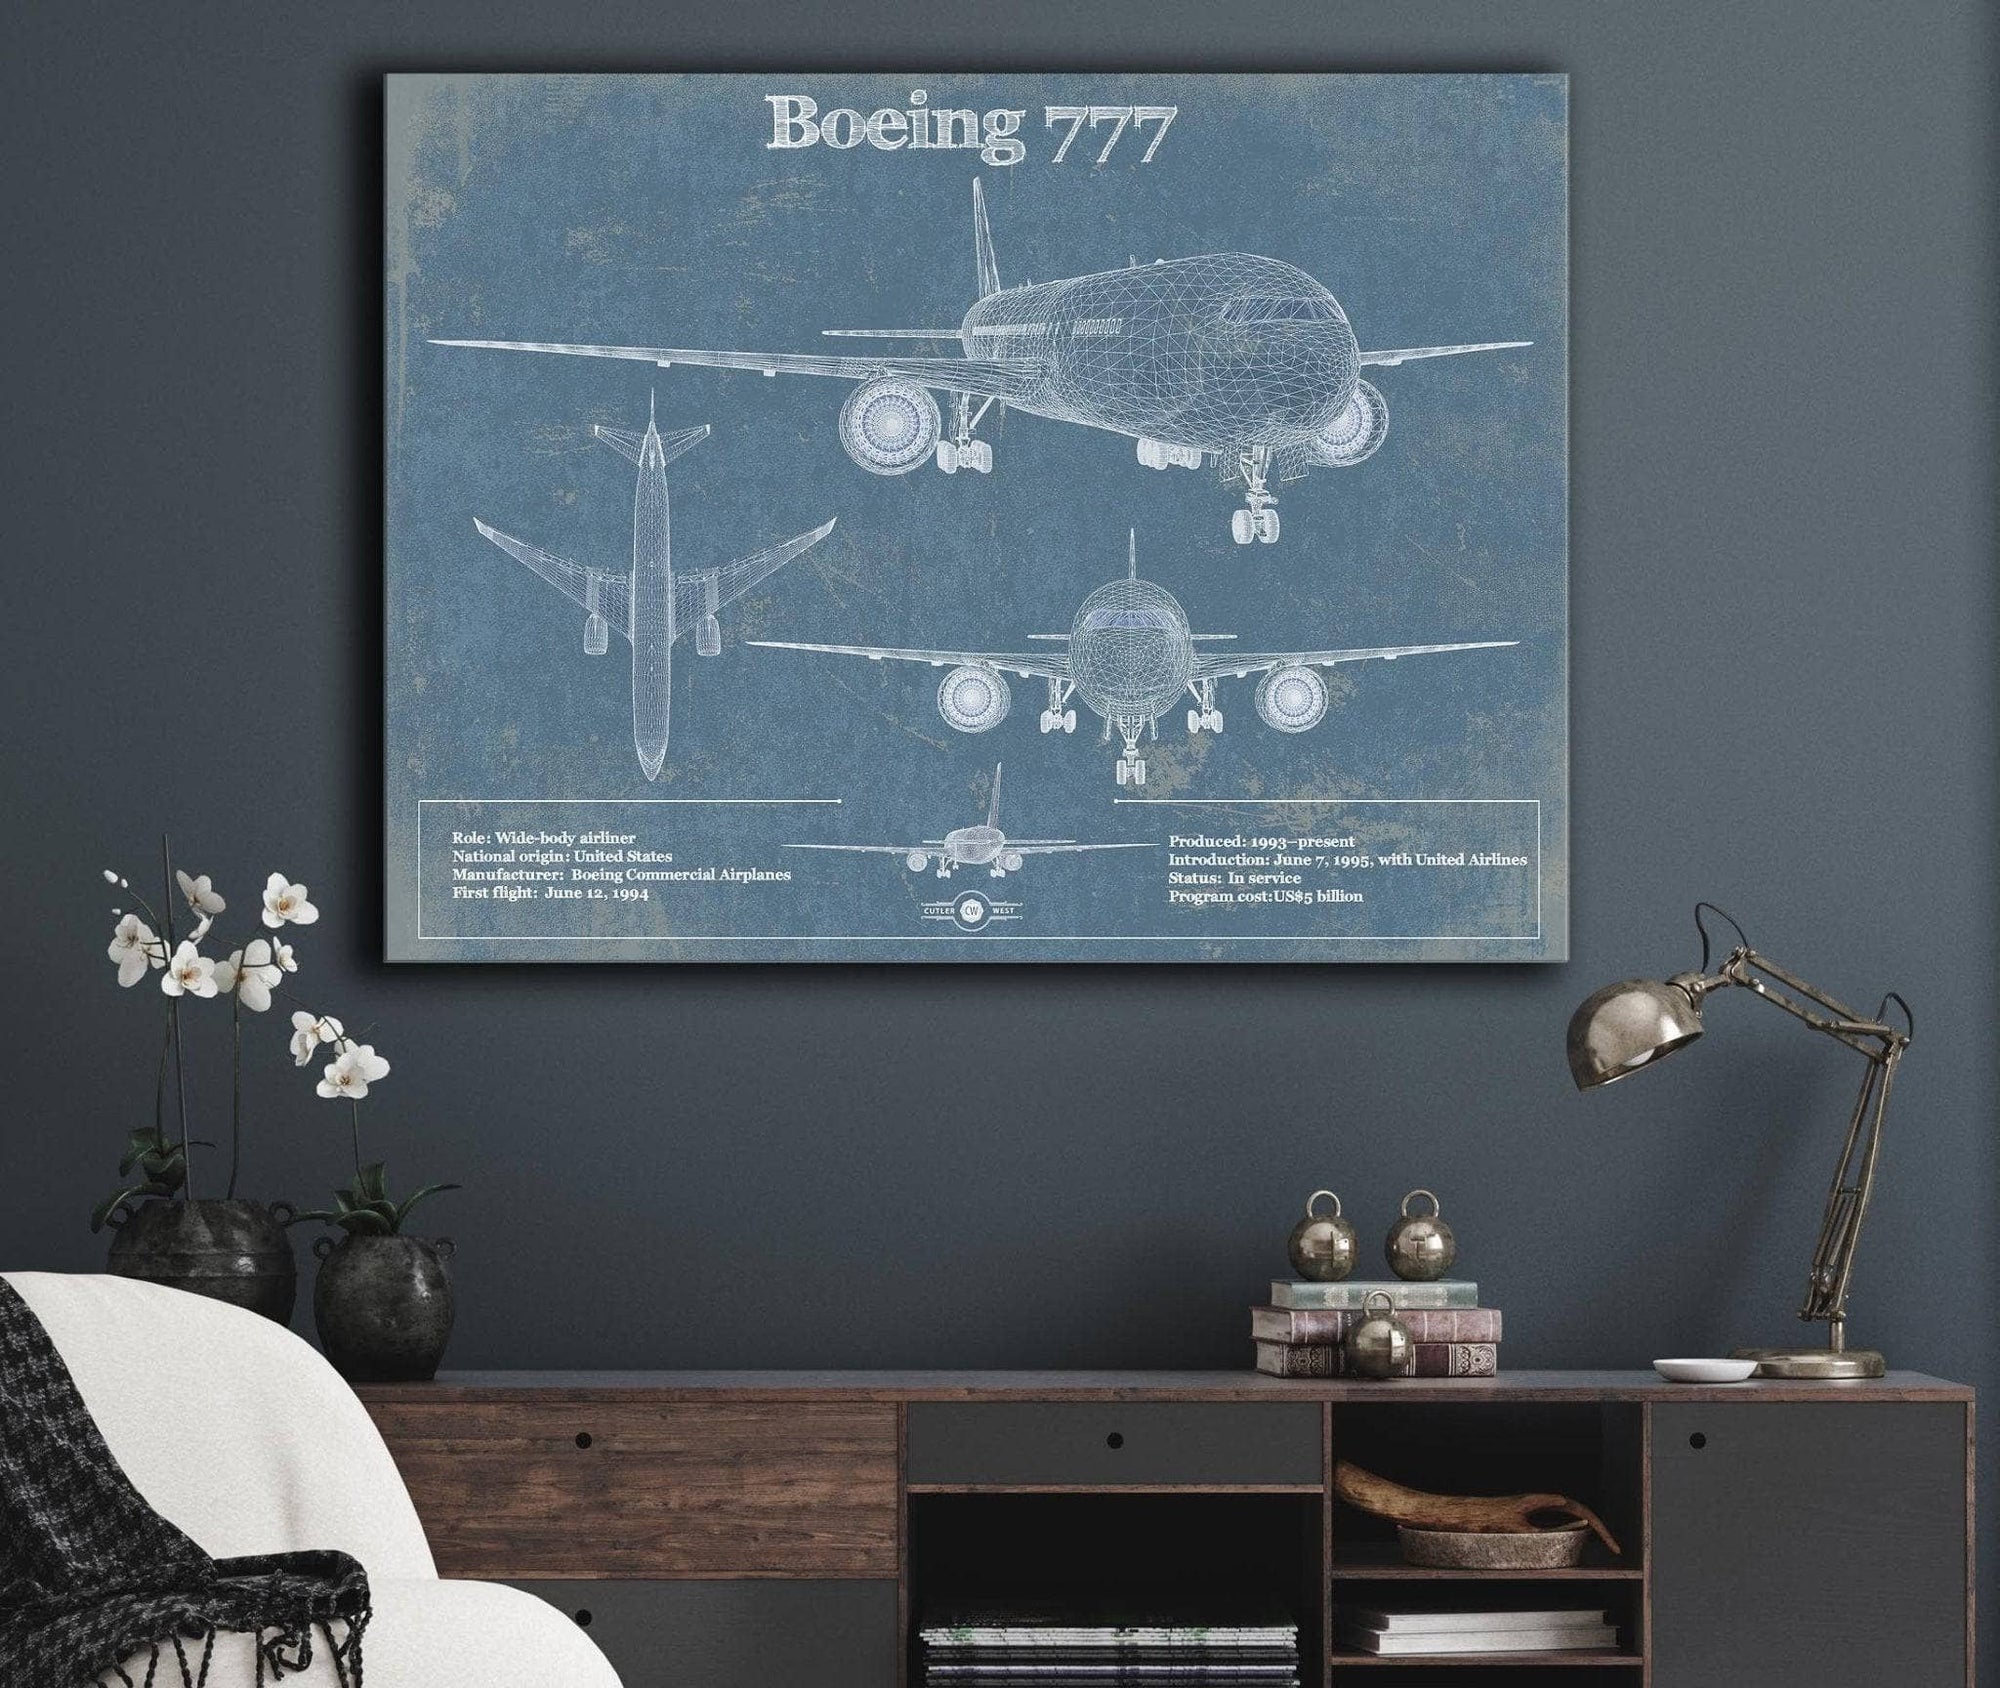 Cutler West Boeing Collection Boeing 777 Vintage Aviation Blueprint Print - Custom Pilot Name Can Be Added